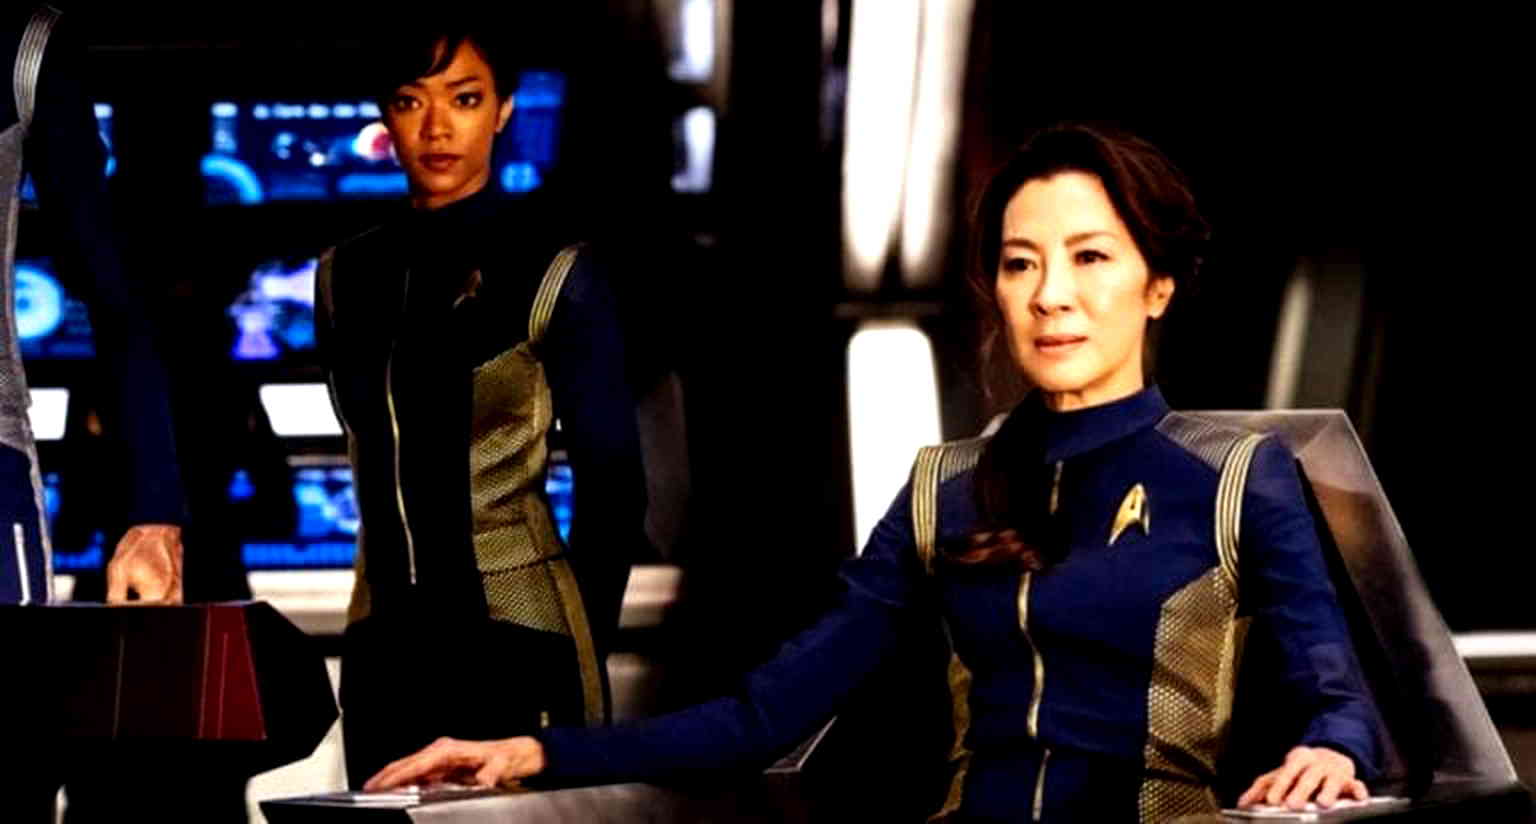 Why It’s Important Michelle Yeoh Kept Her Malaysian Accent in ‘Star Trek: Discovery’